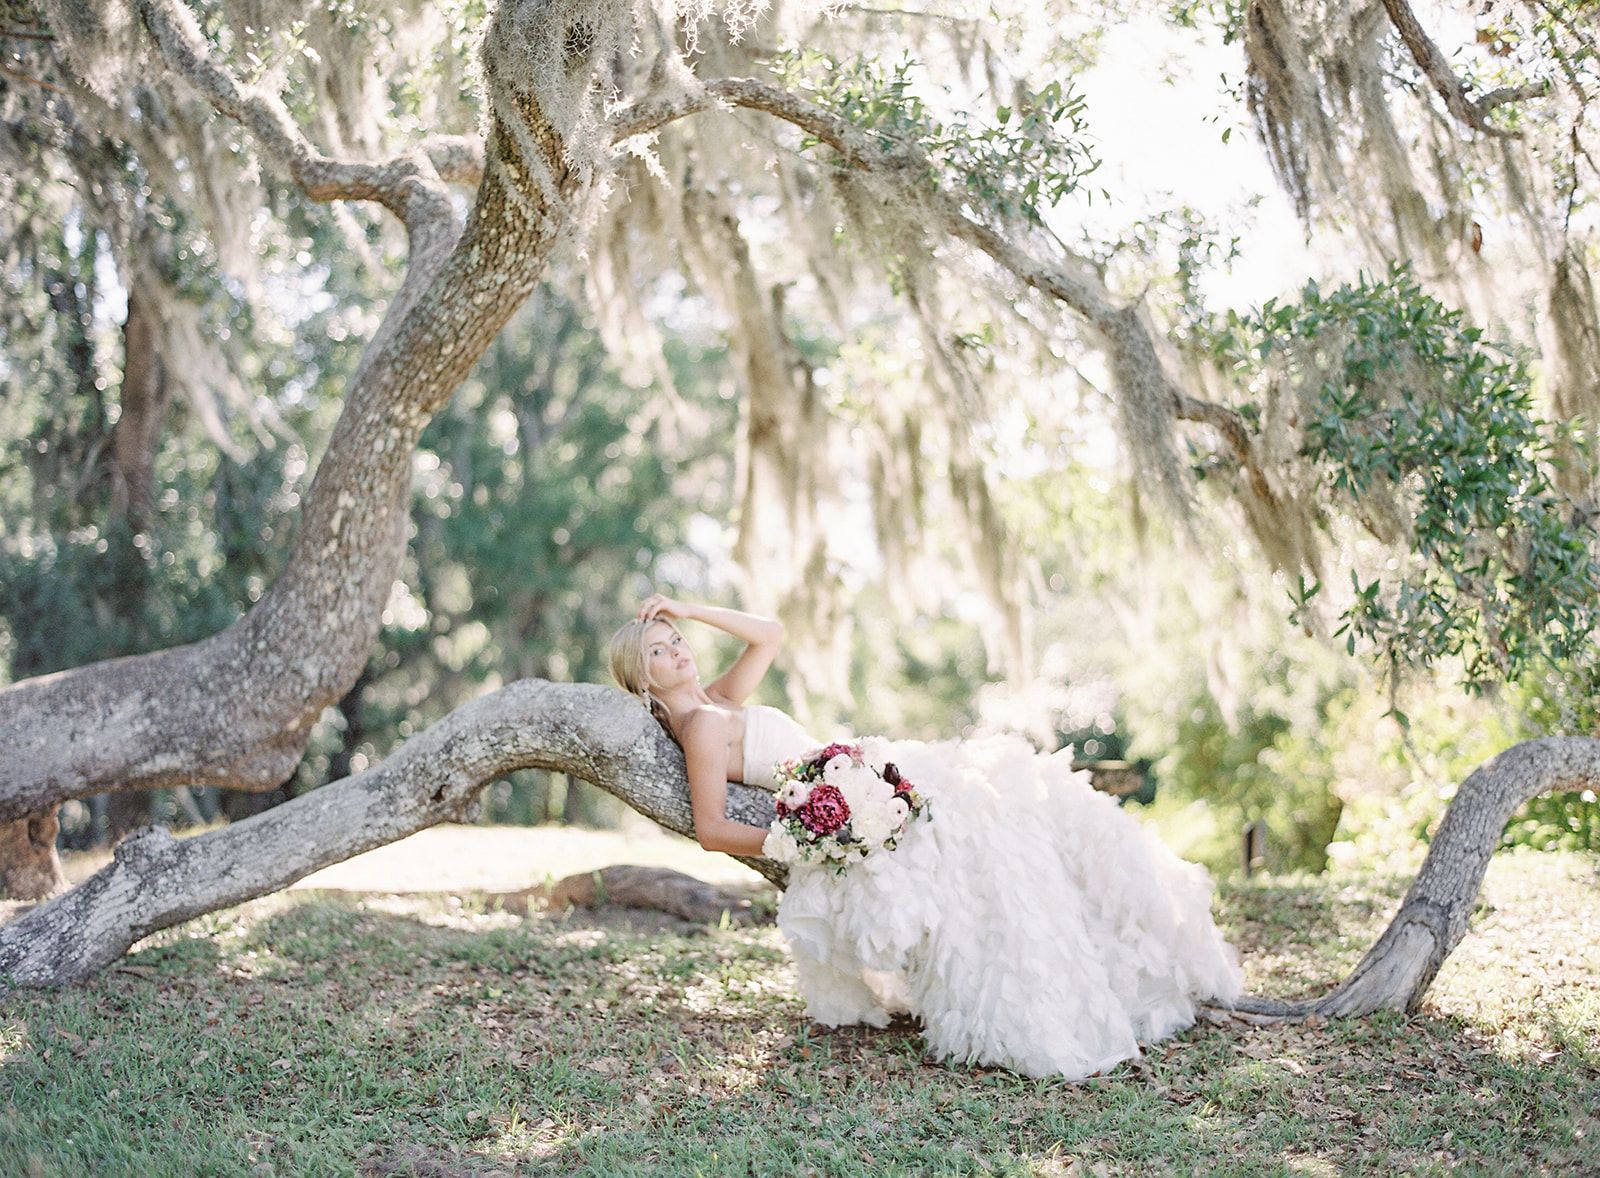 Bride with blonde hair and white dress laying across the limb of a tree